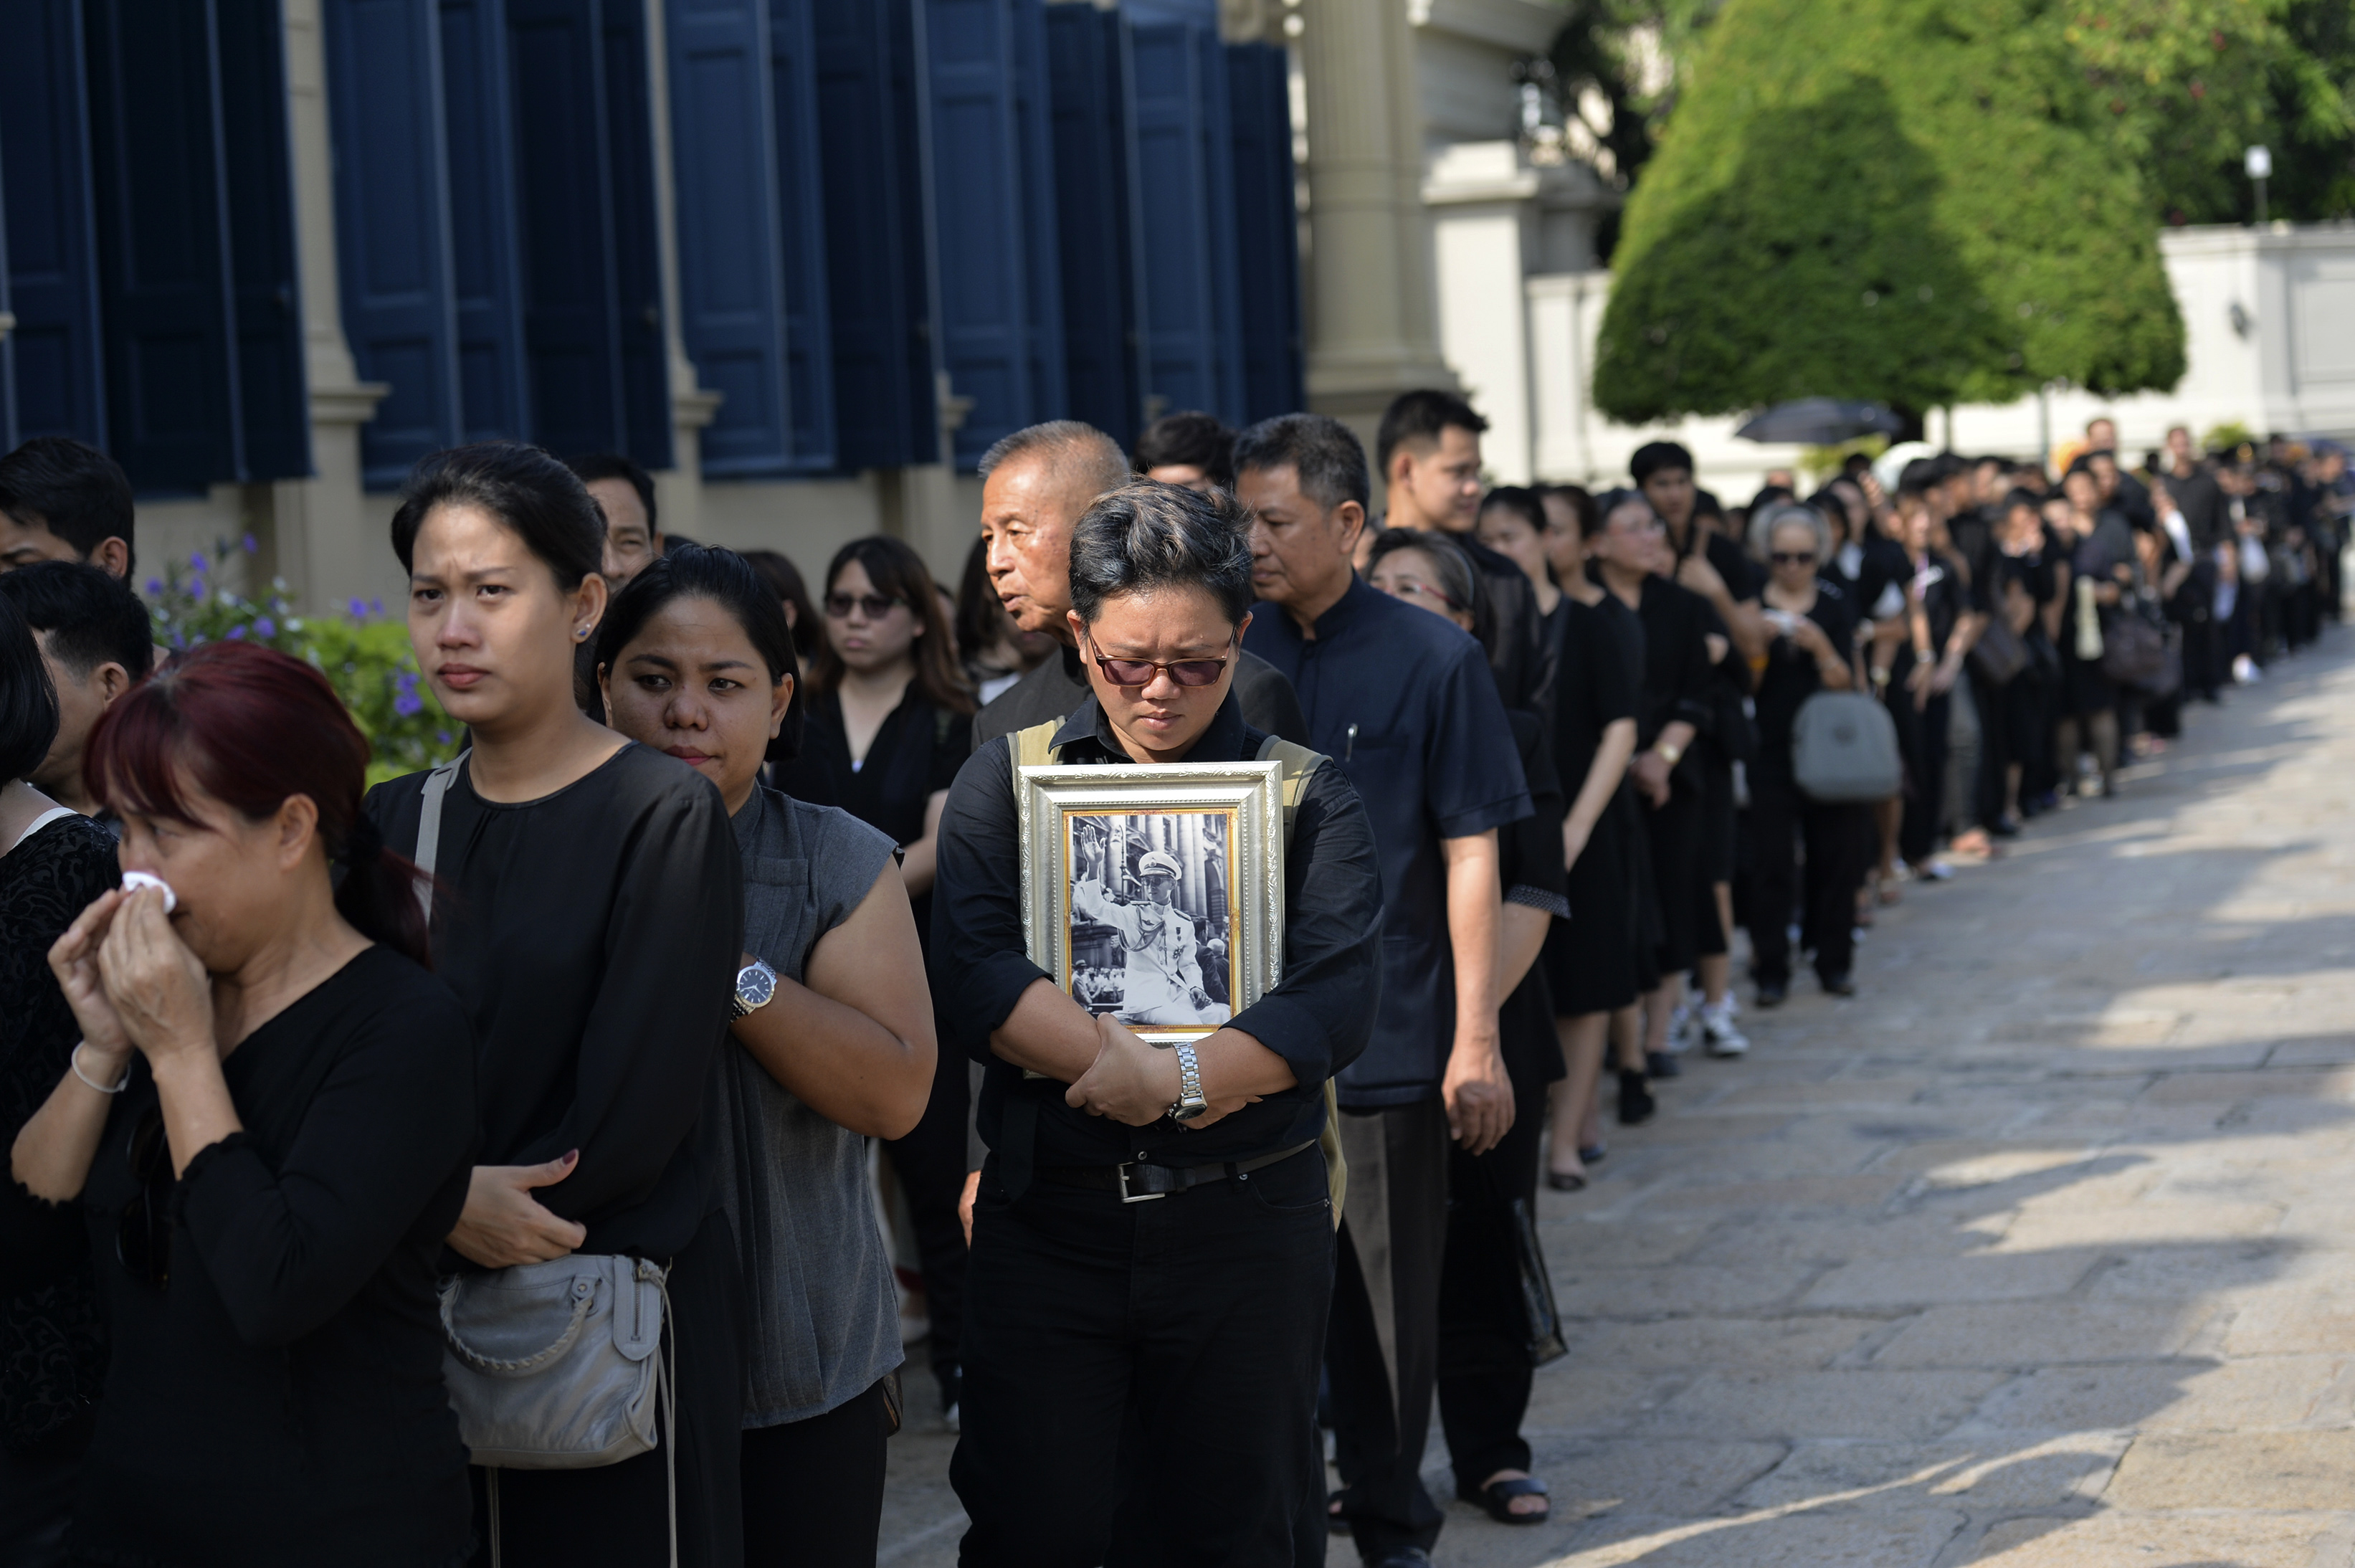 People wait in line to pay their respects to Thai King Bhumibol Adulyadej at the Grand Palace in Bangkok on October 14, 2016. King Bhumibol Adulyadej, long a unifying figure in politically fractious Thailand, died on October 13 and uncertainty over the succession quickly arose as his crown prince reportedly sought a delay in taking over. / AFP PHOTO / MUNIR UZ ZAMAN